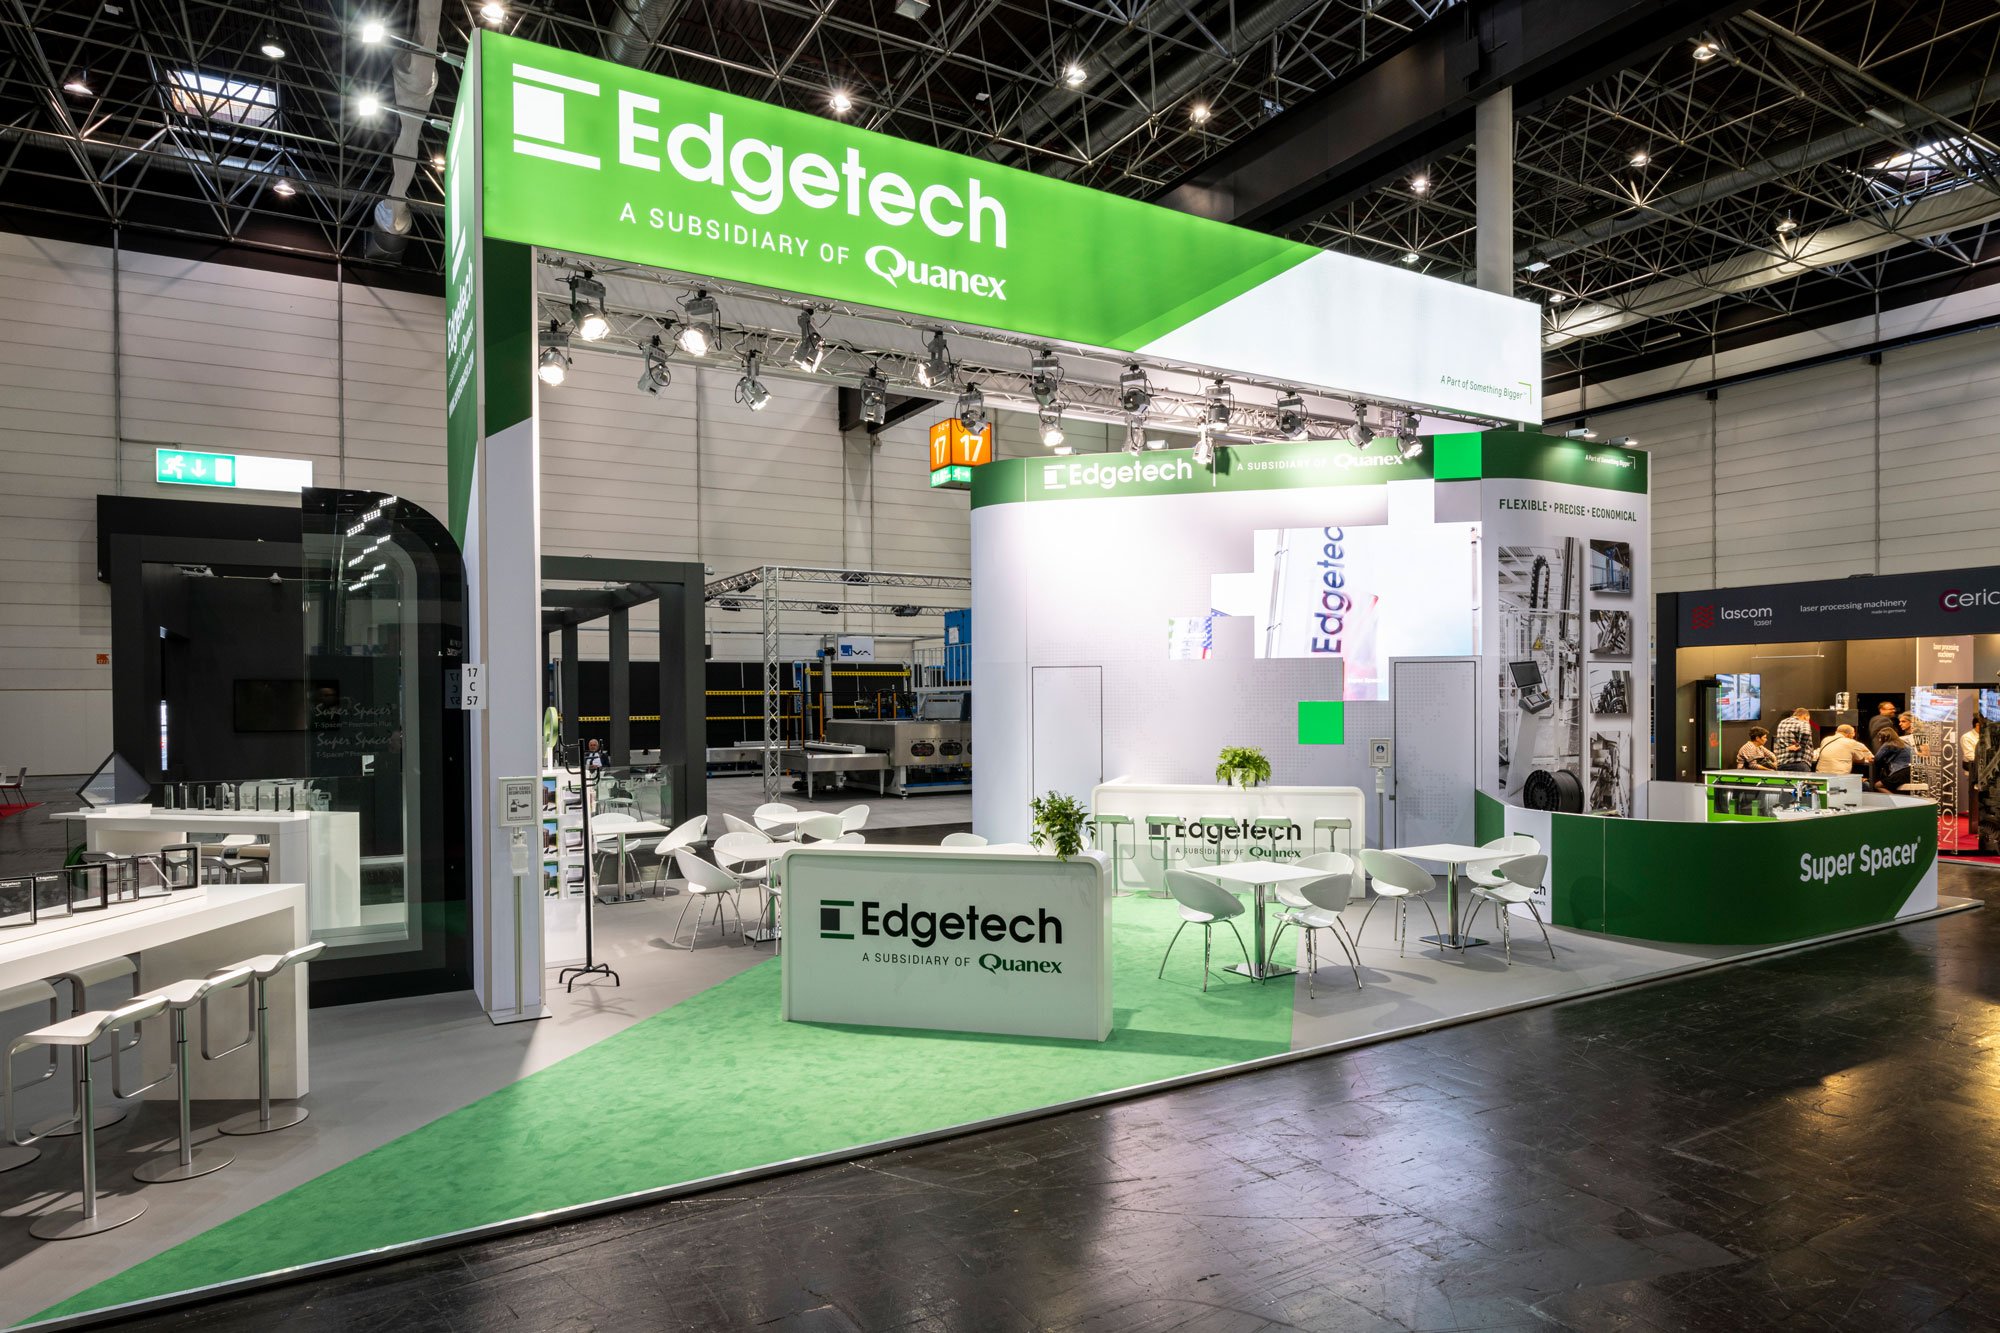 Individual exhibition stand for Edgetech Europe GmbH at glasstech in dusseldorf